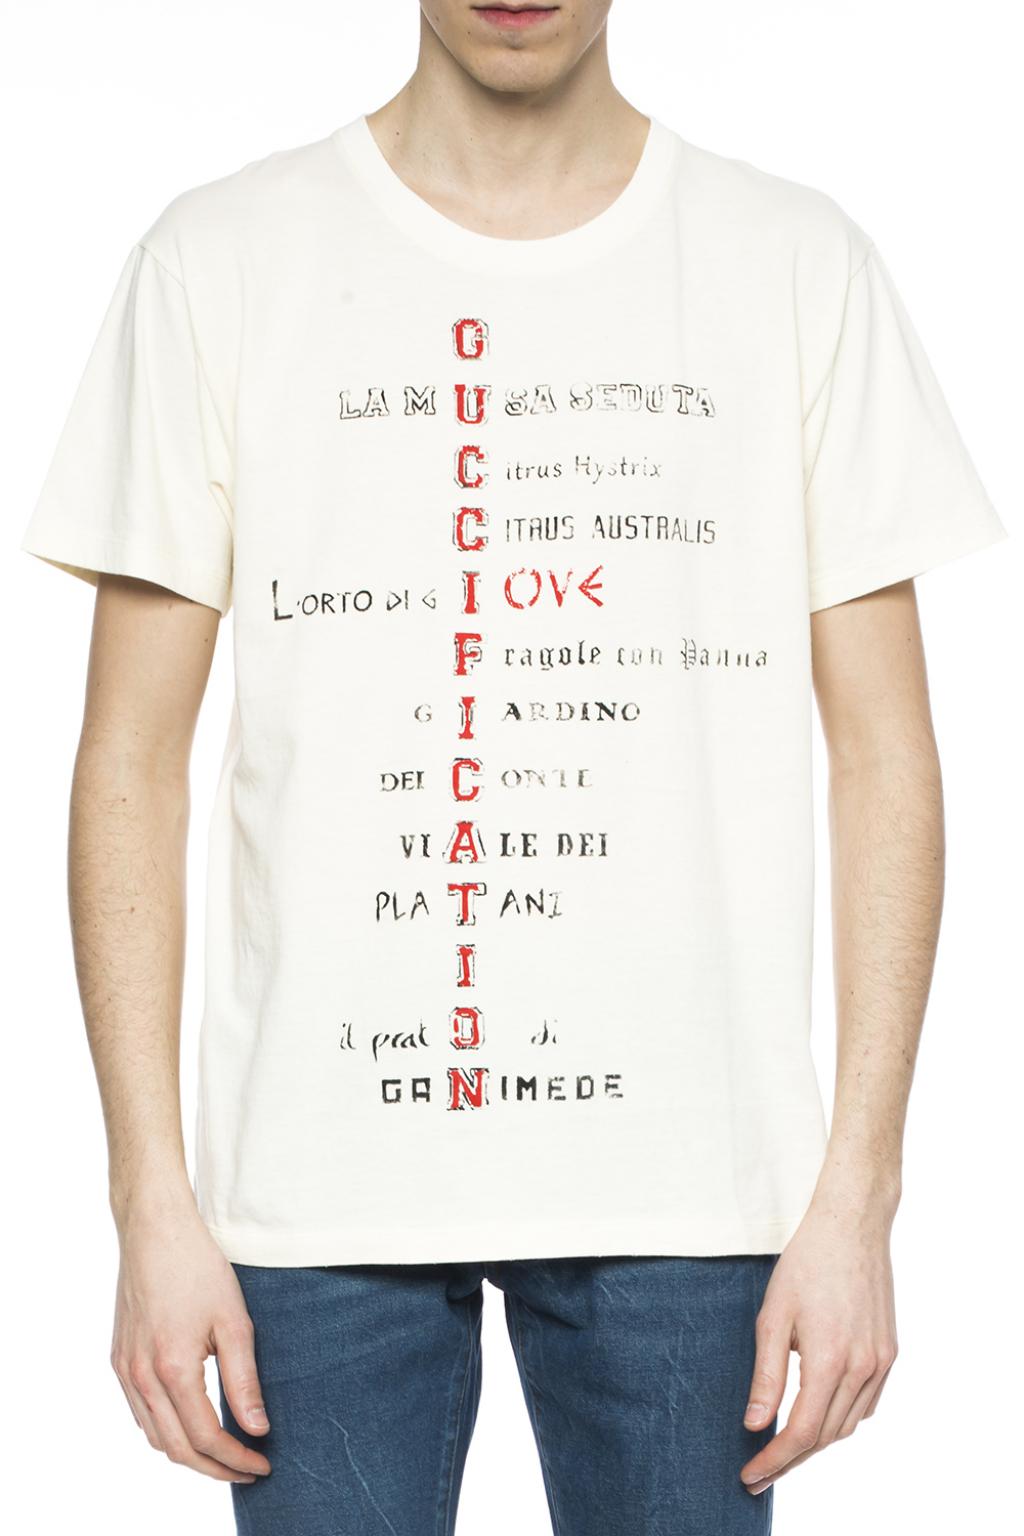 guccification t shirt